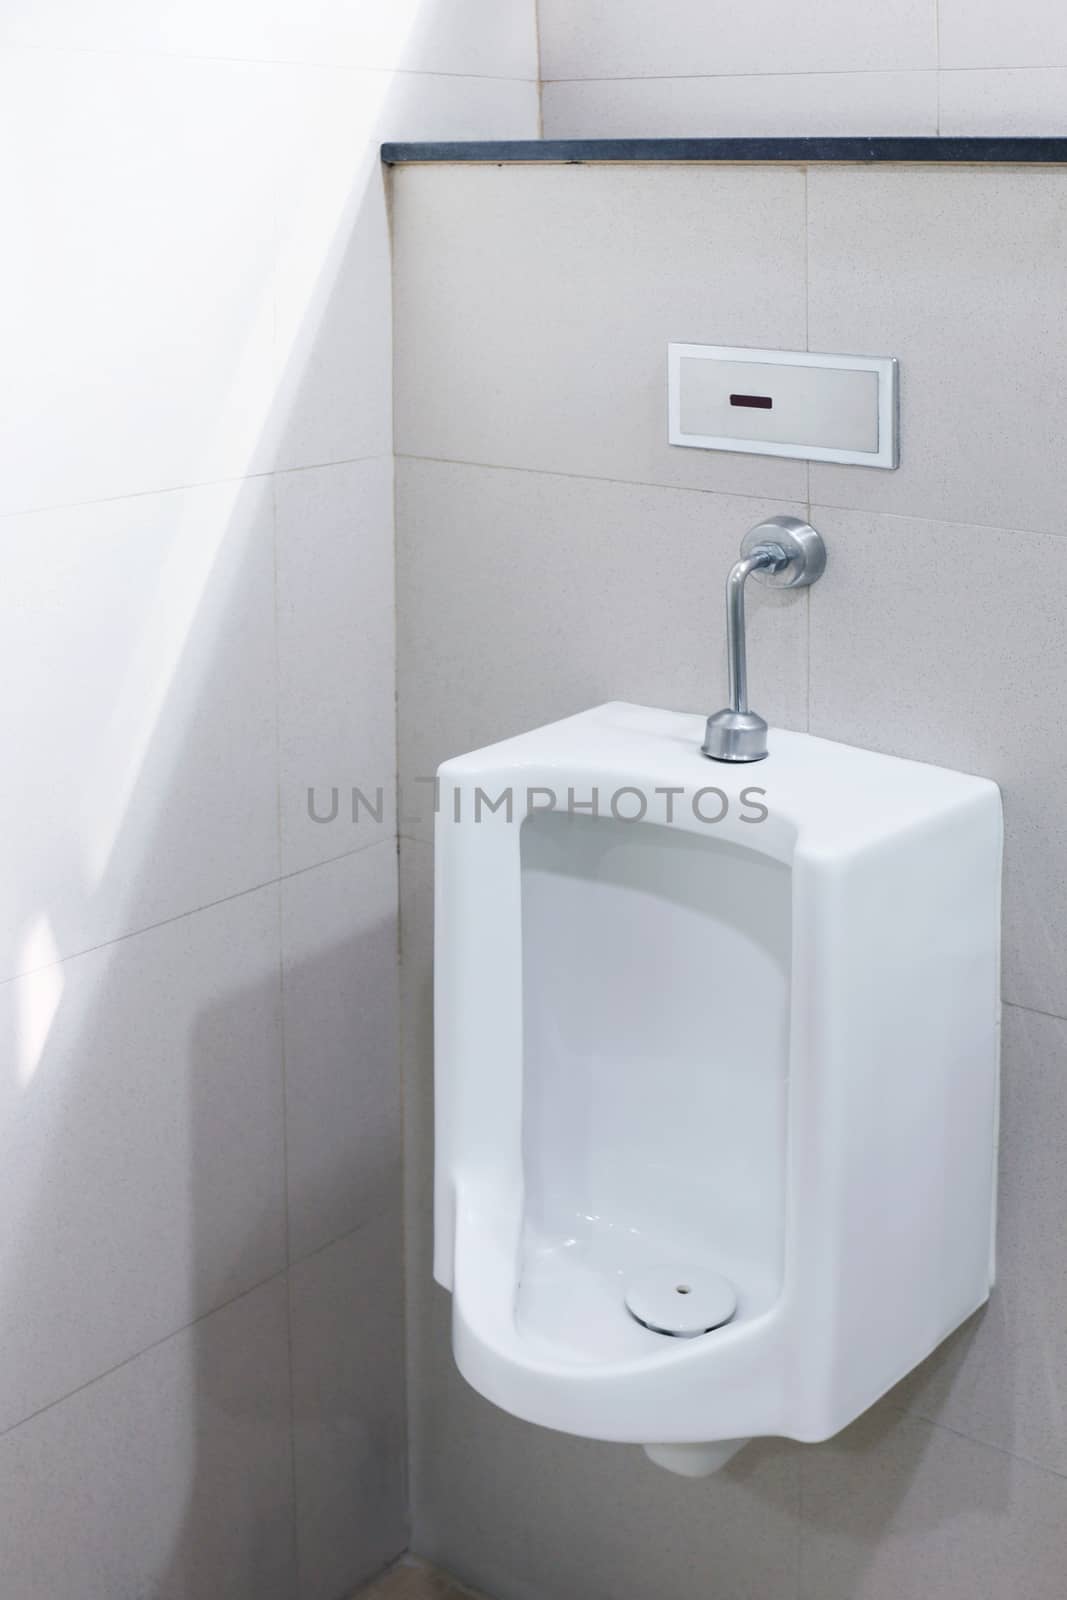 Urinals for men outdoor toilet, Urinals white ceramic at bathroom public, close-up white urinals by cgdeaw